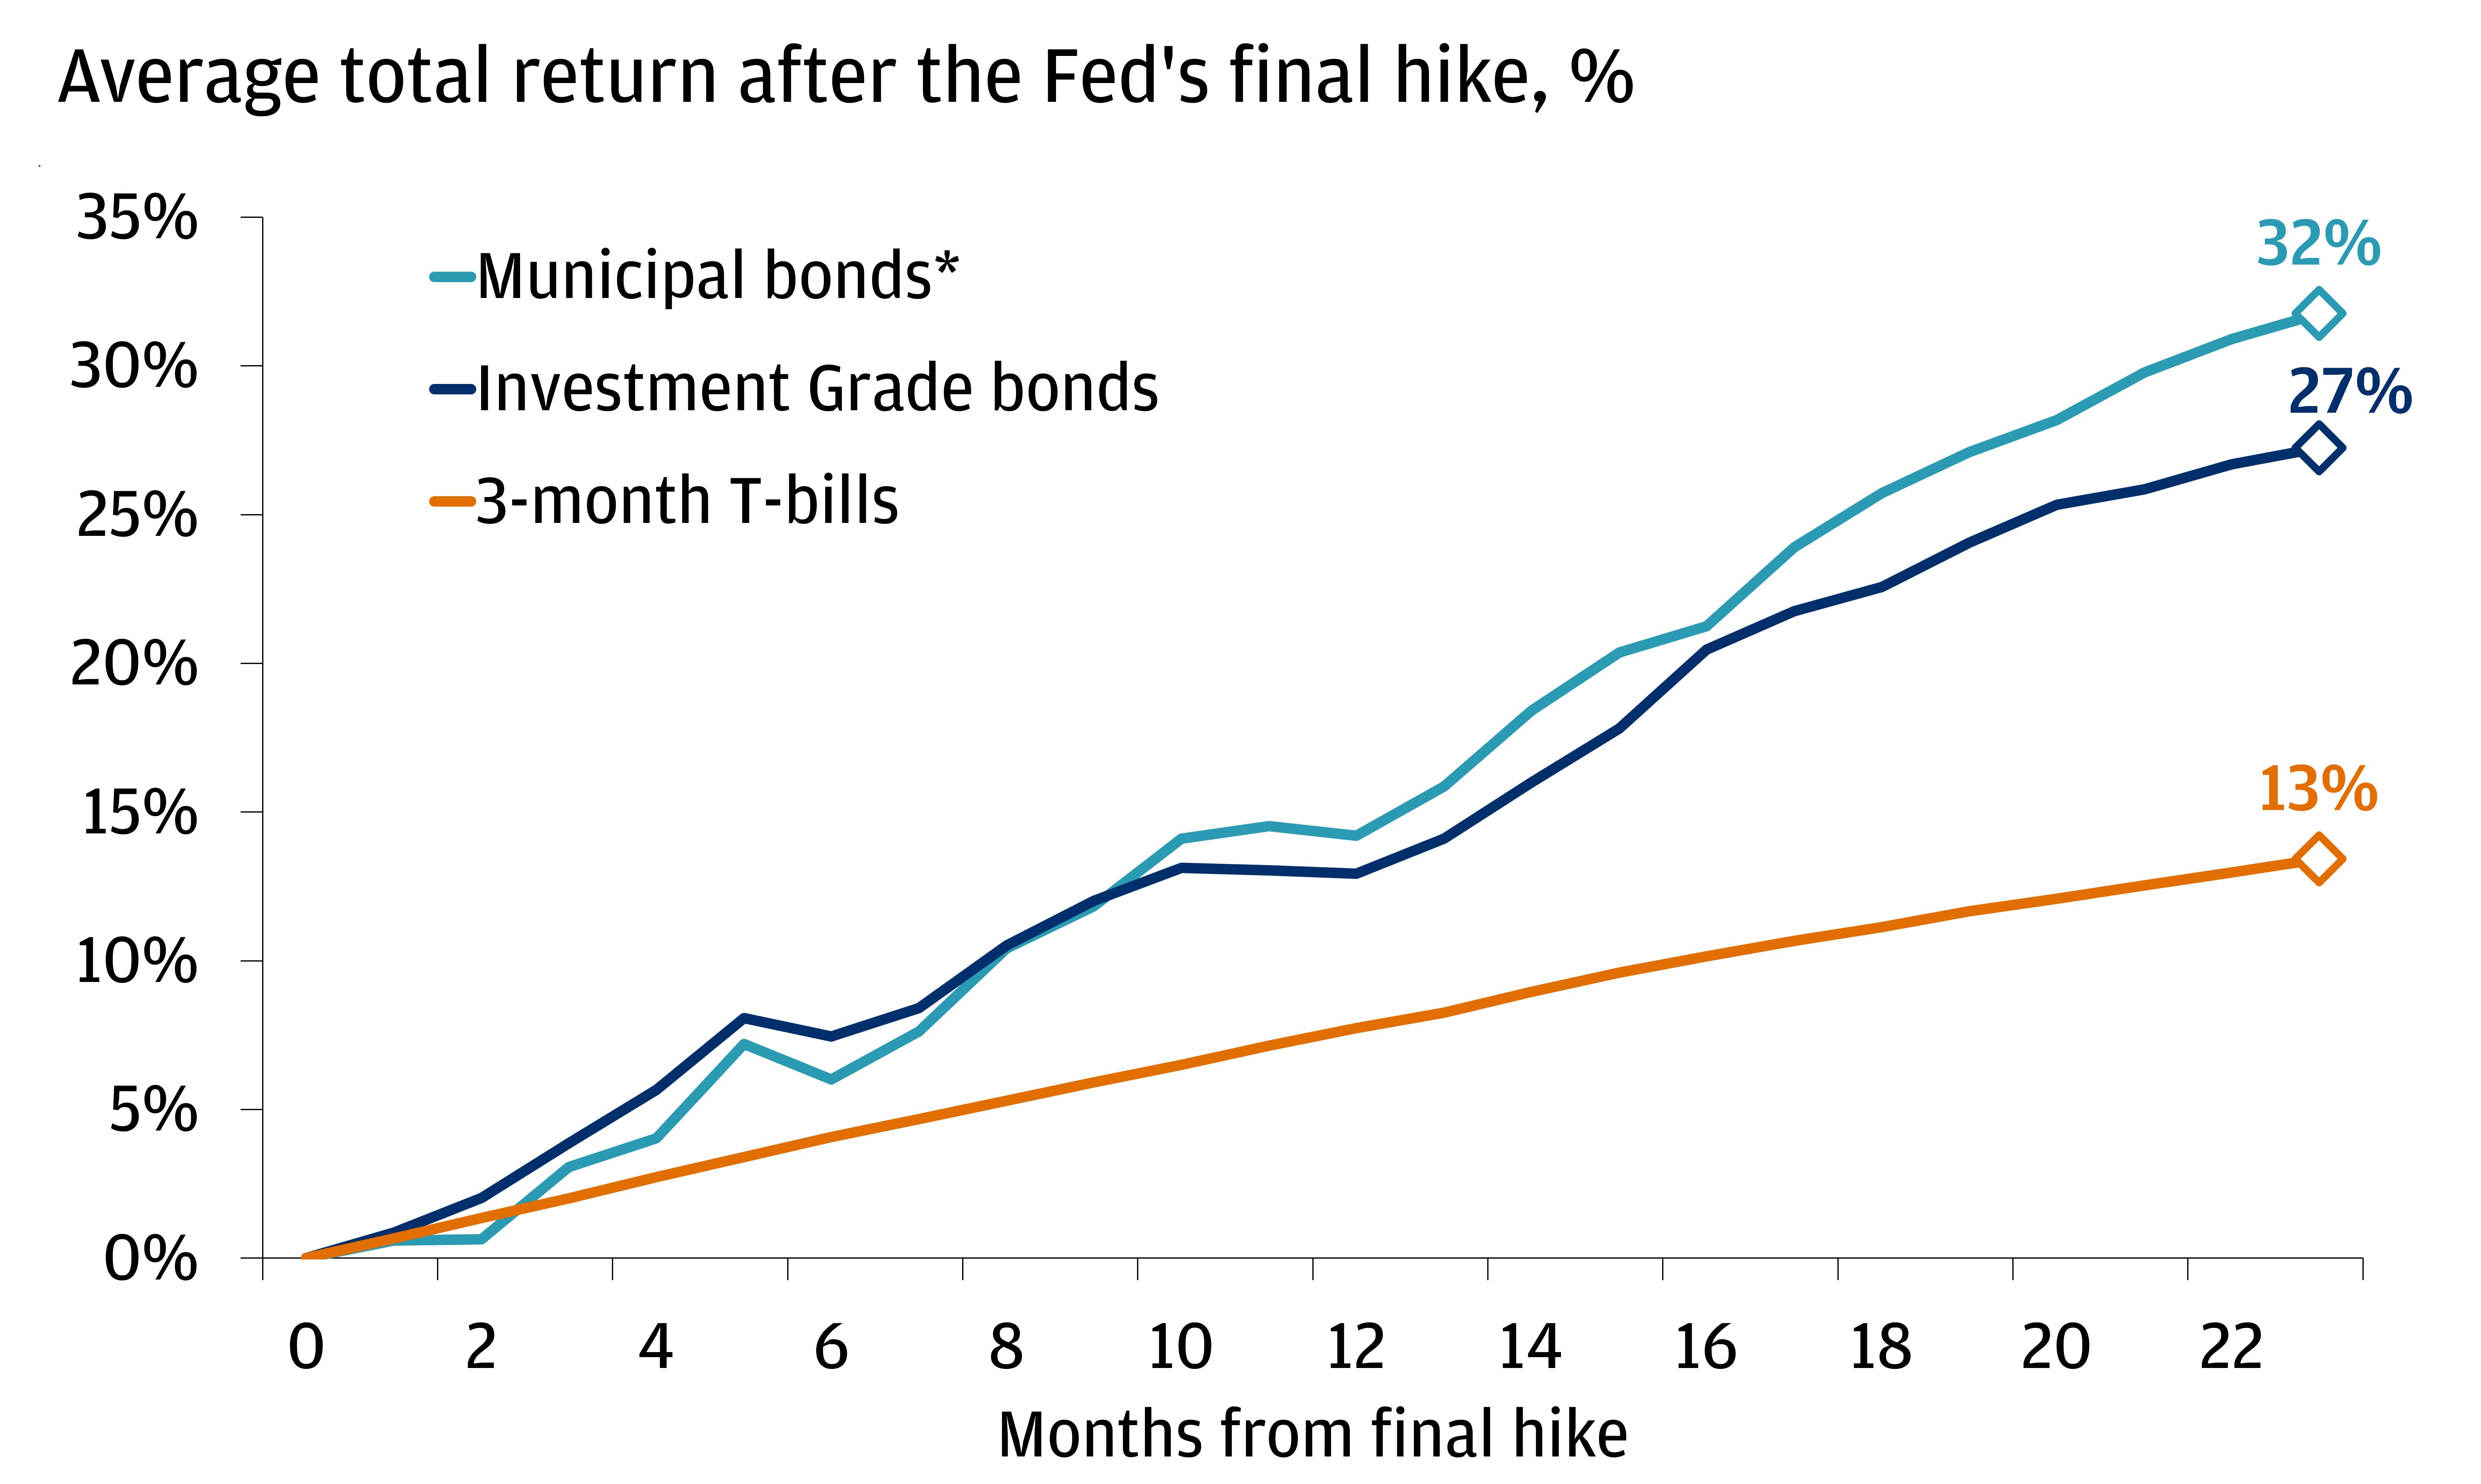 The chart shoes the average total return of municipal bonds, investment grade bonds and 3-month T–bills over the last seven Fed hiking cycles.